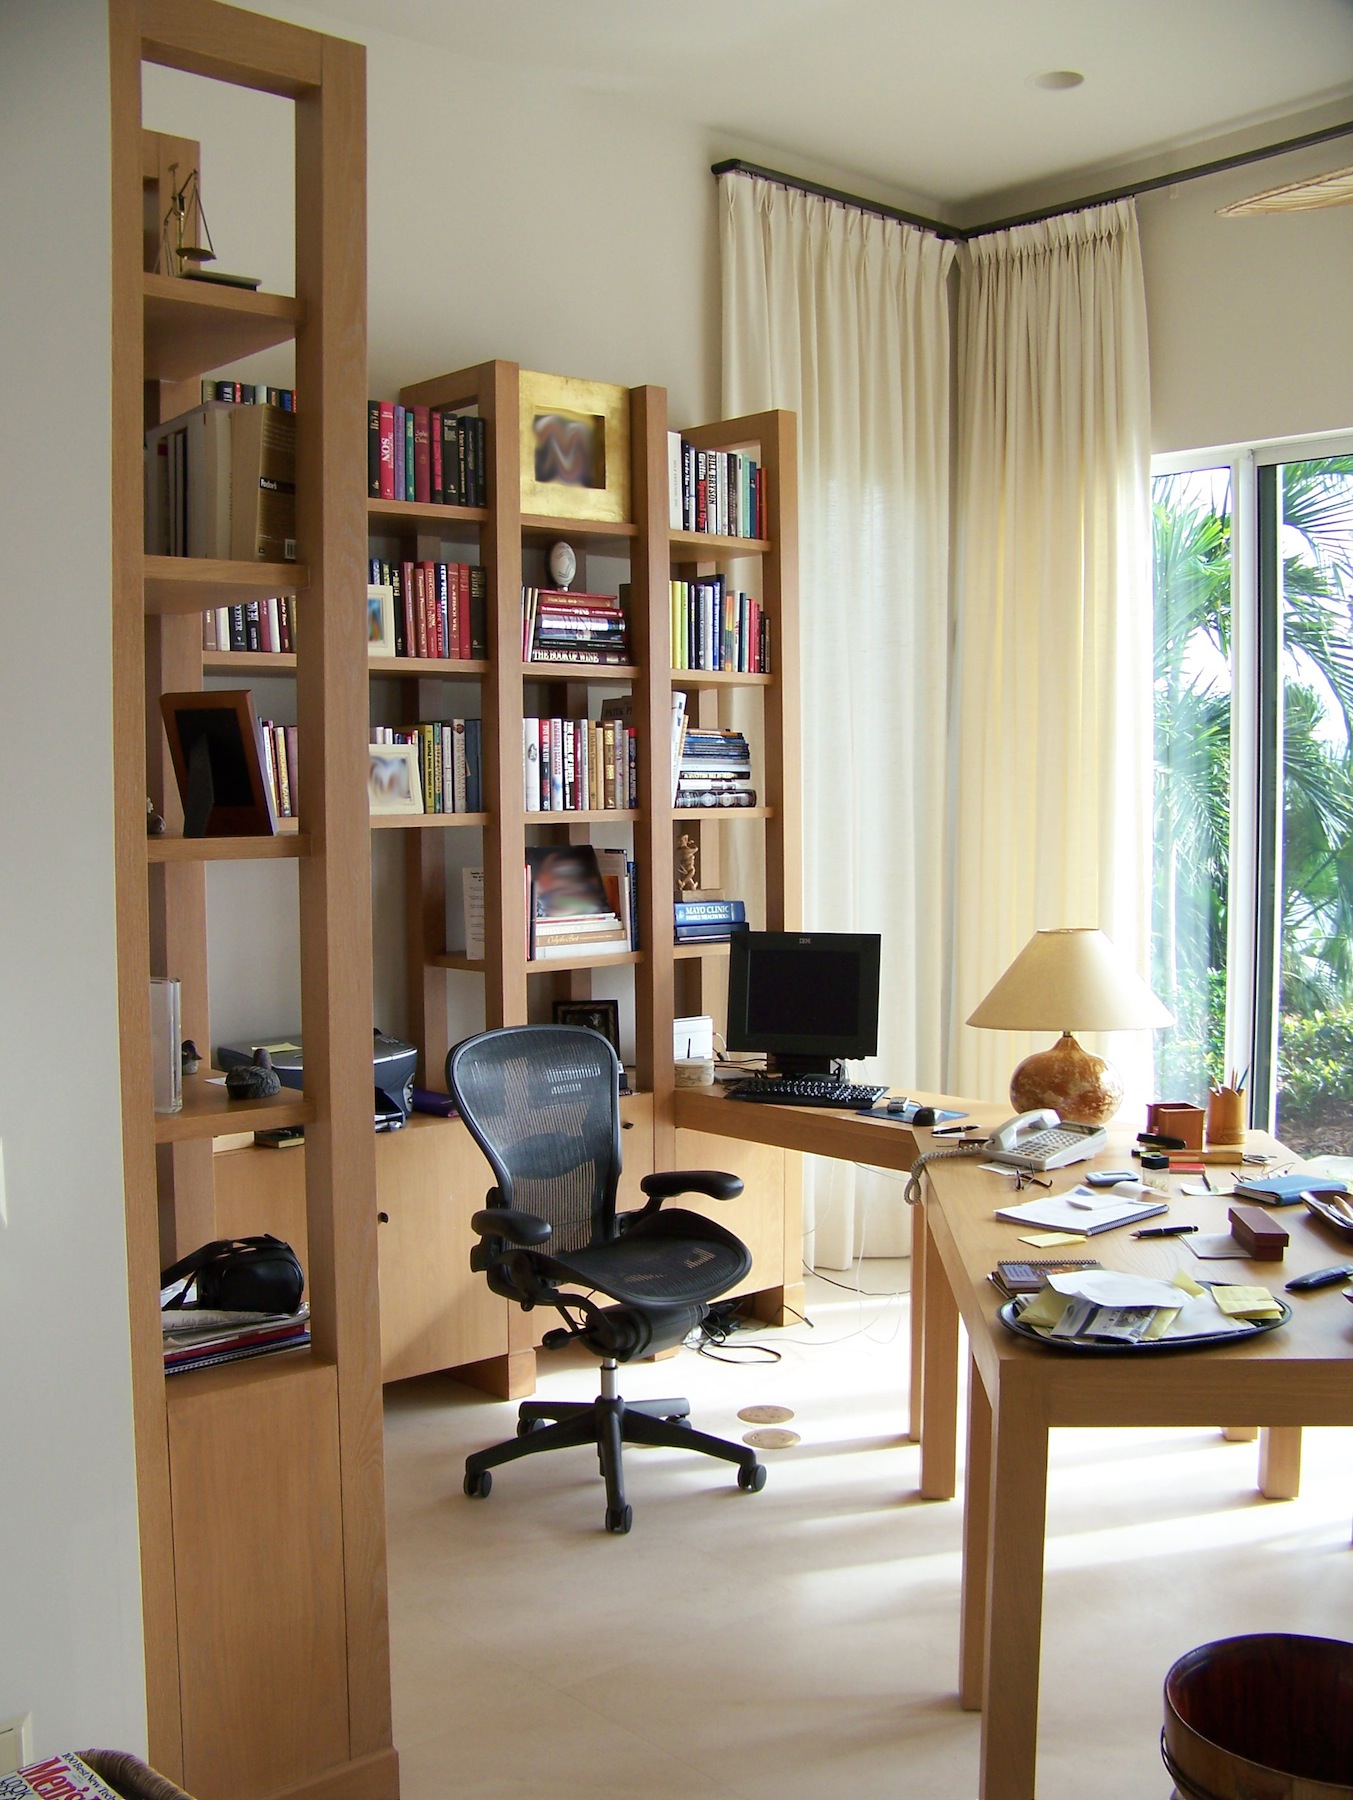 Home office cabinets and desk, view 2 - Hutchinson Island